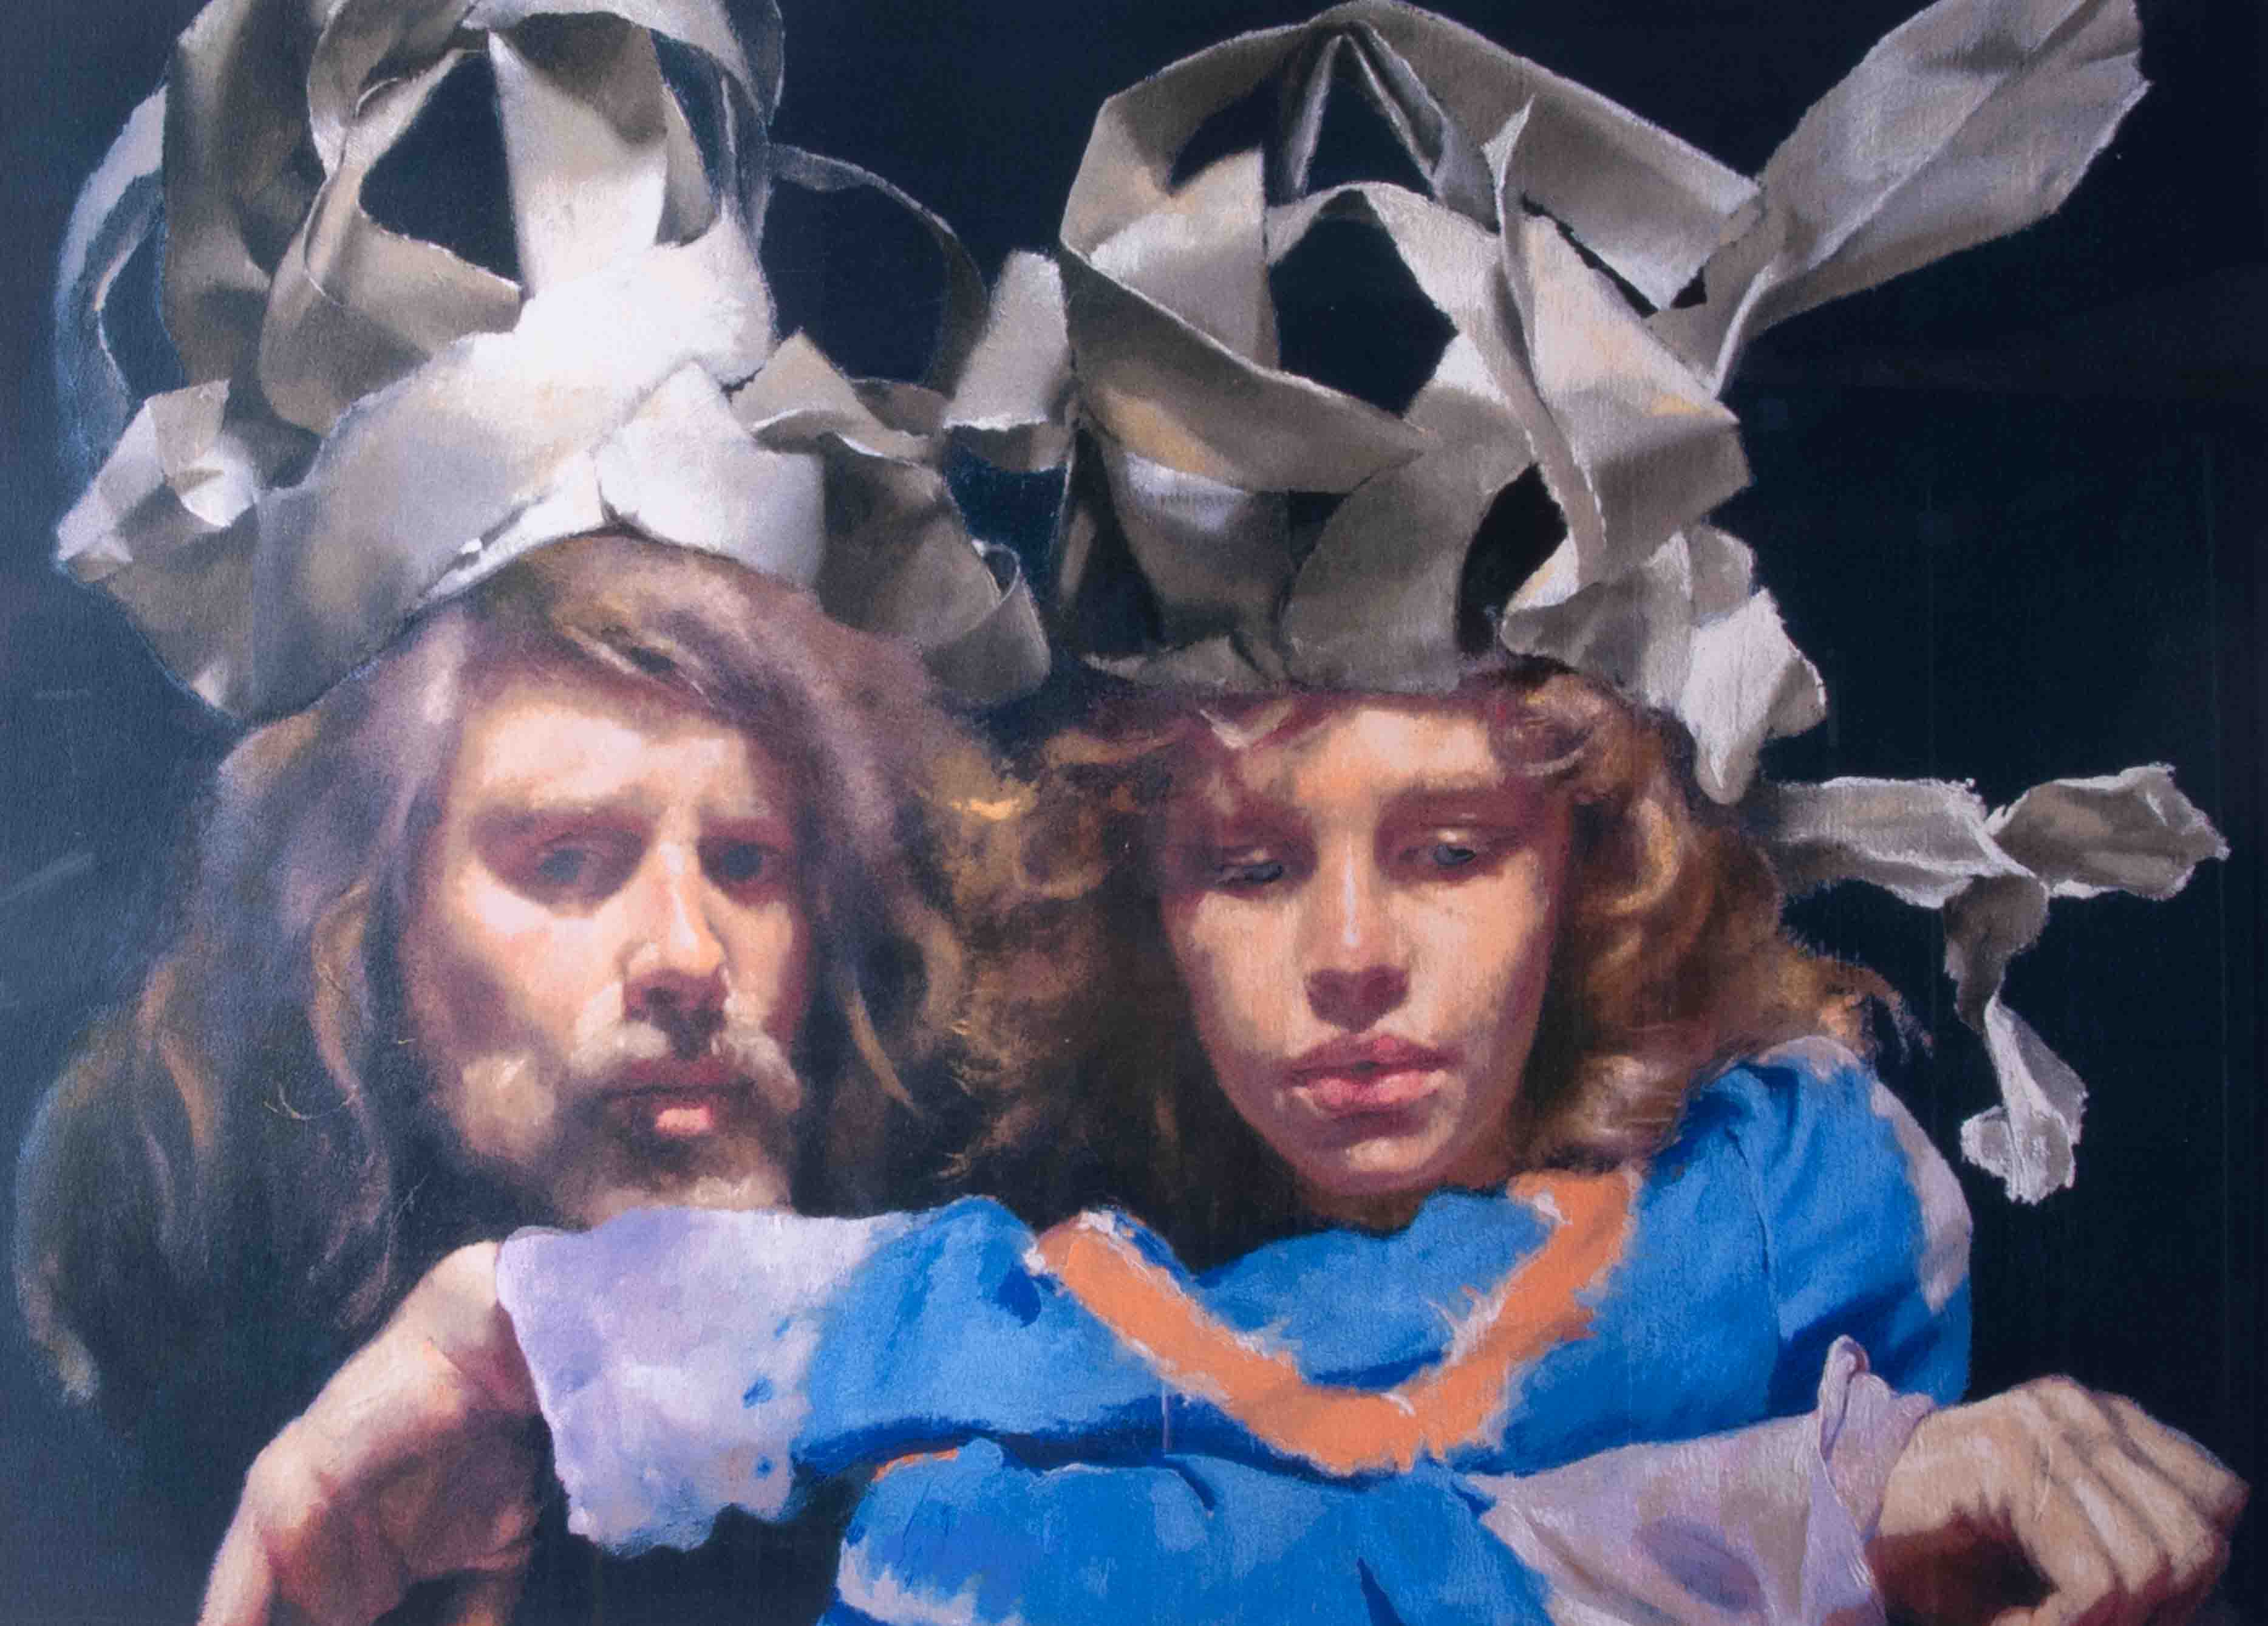 Robert Lenkiewicz, 'Paper Crowns', signed limited edition print 92/250, 47cm x 63cm, - Image 2 of 2